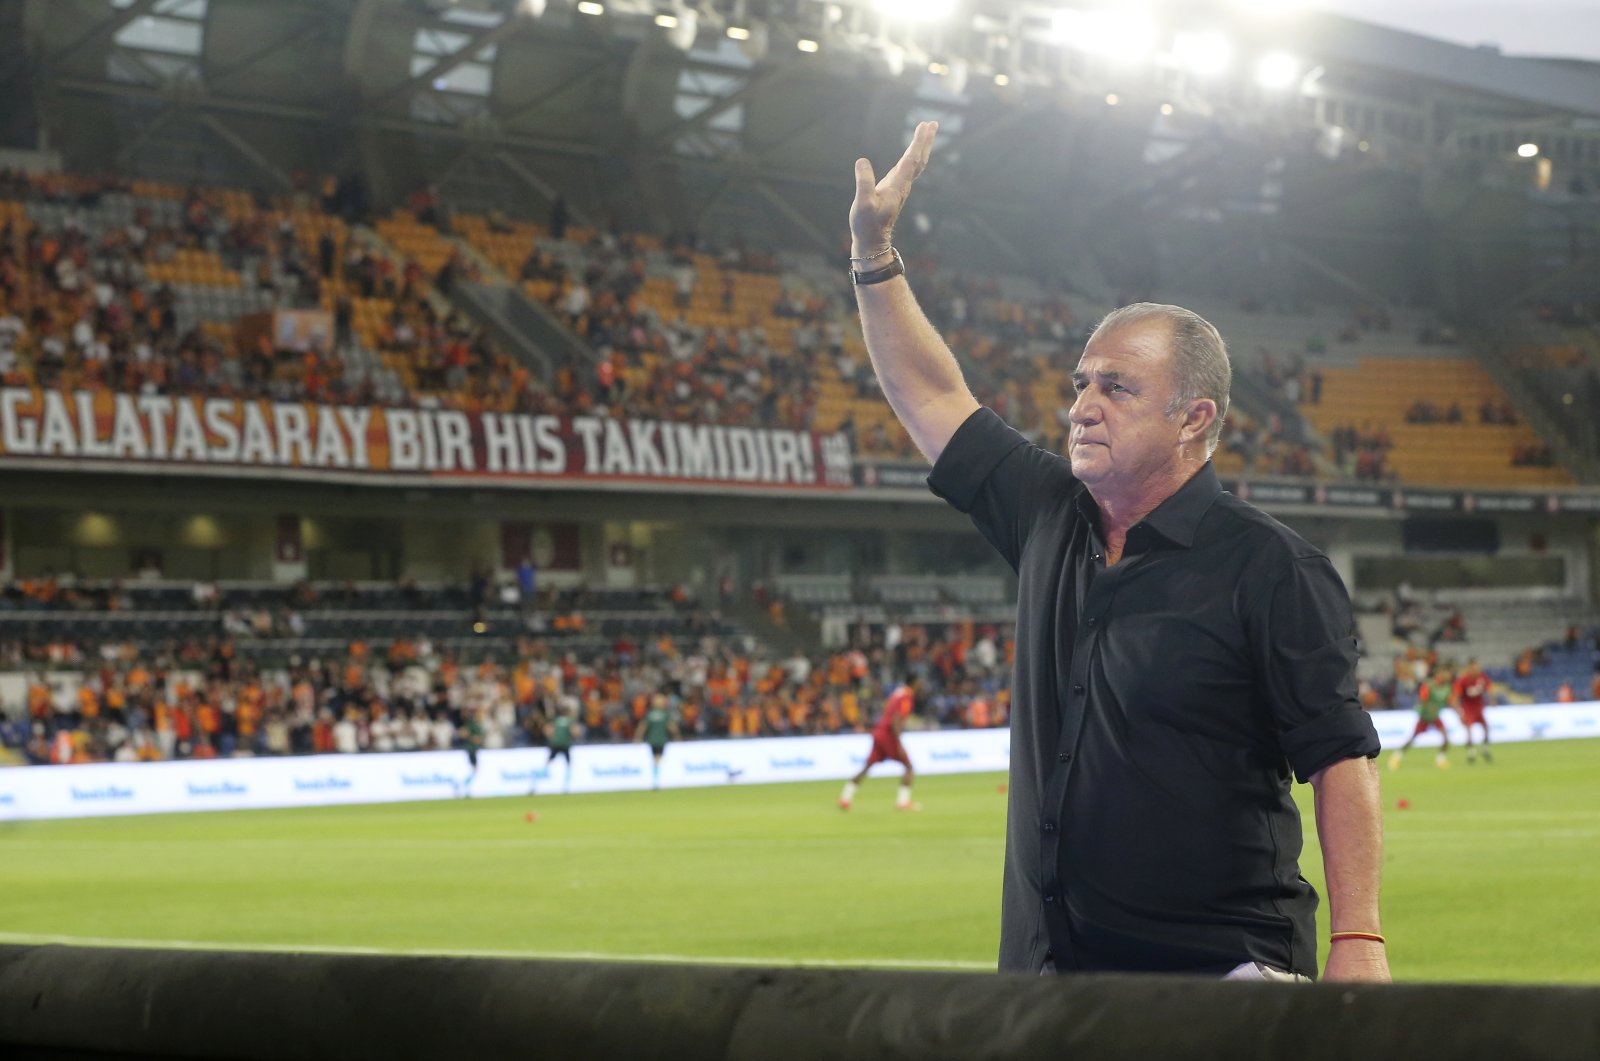 Then-Galatasaray coach Fatih Terim waves to the fans before a Champions League qualifier against PSV, Istanbul, Tükiye, July 28, 2021. (AP Photo)